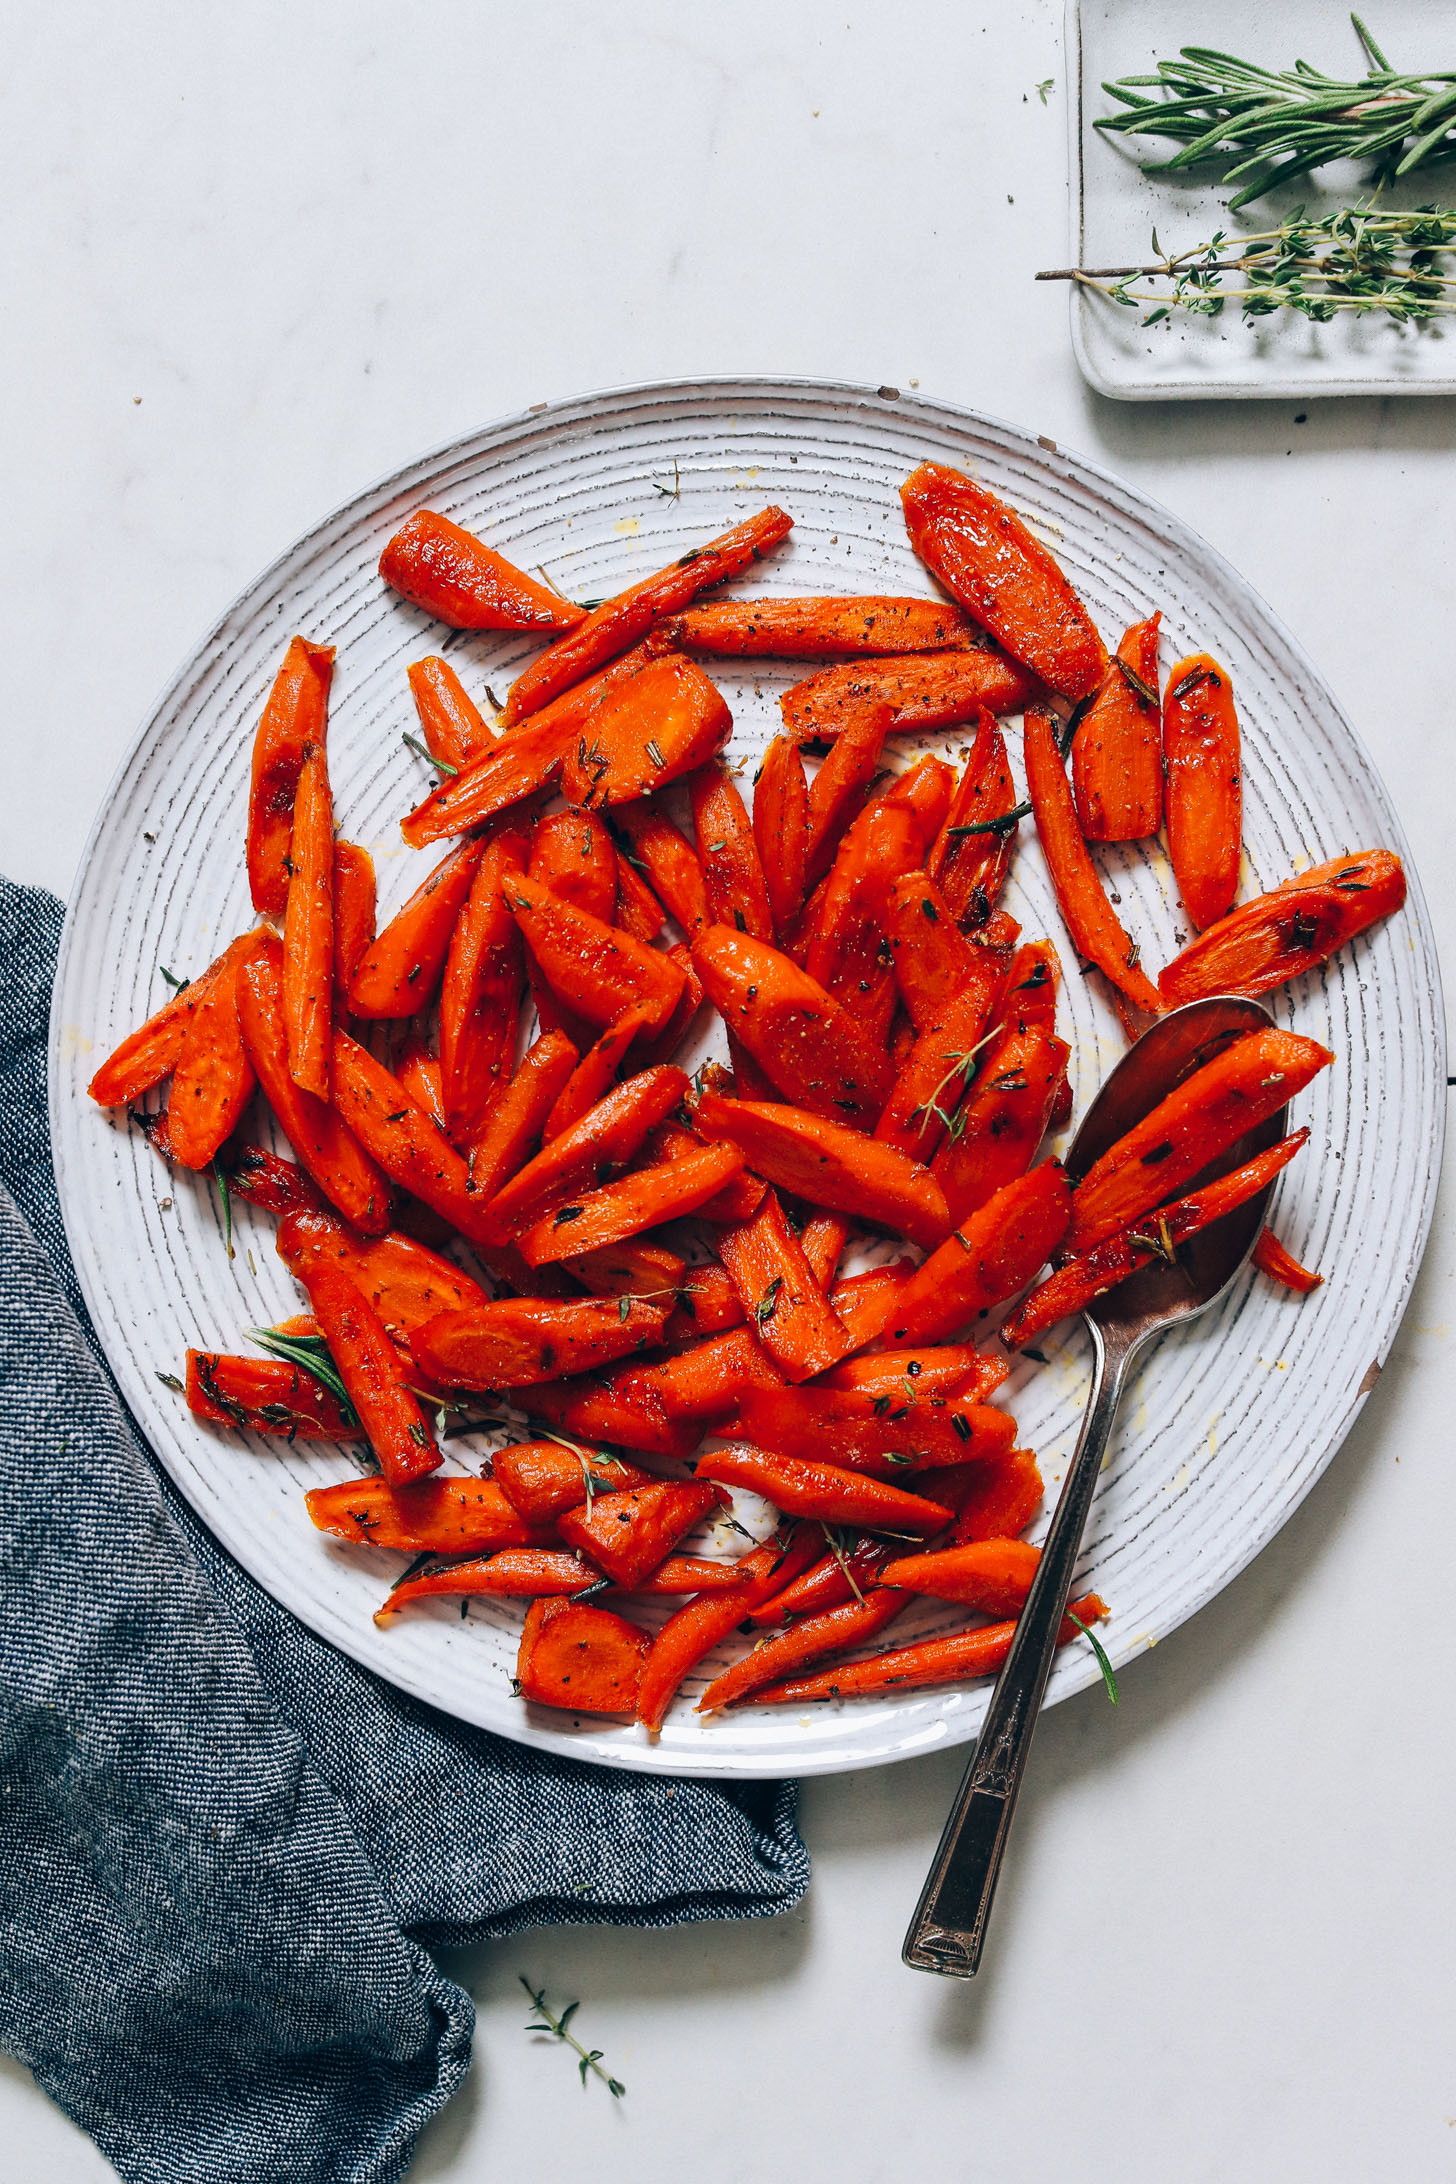 Platter of roasted carrots with fresh thyme and rosemary